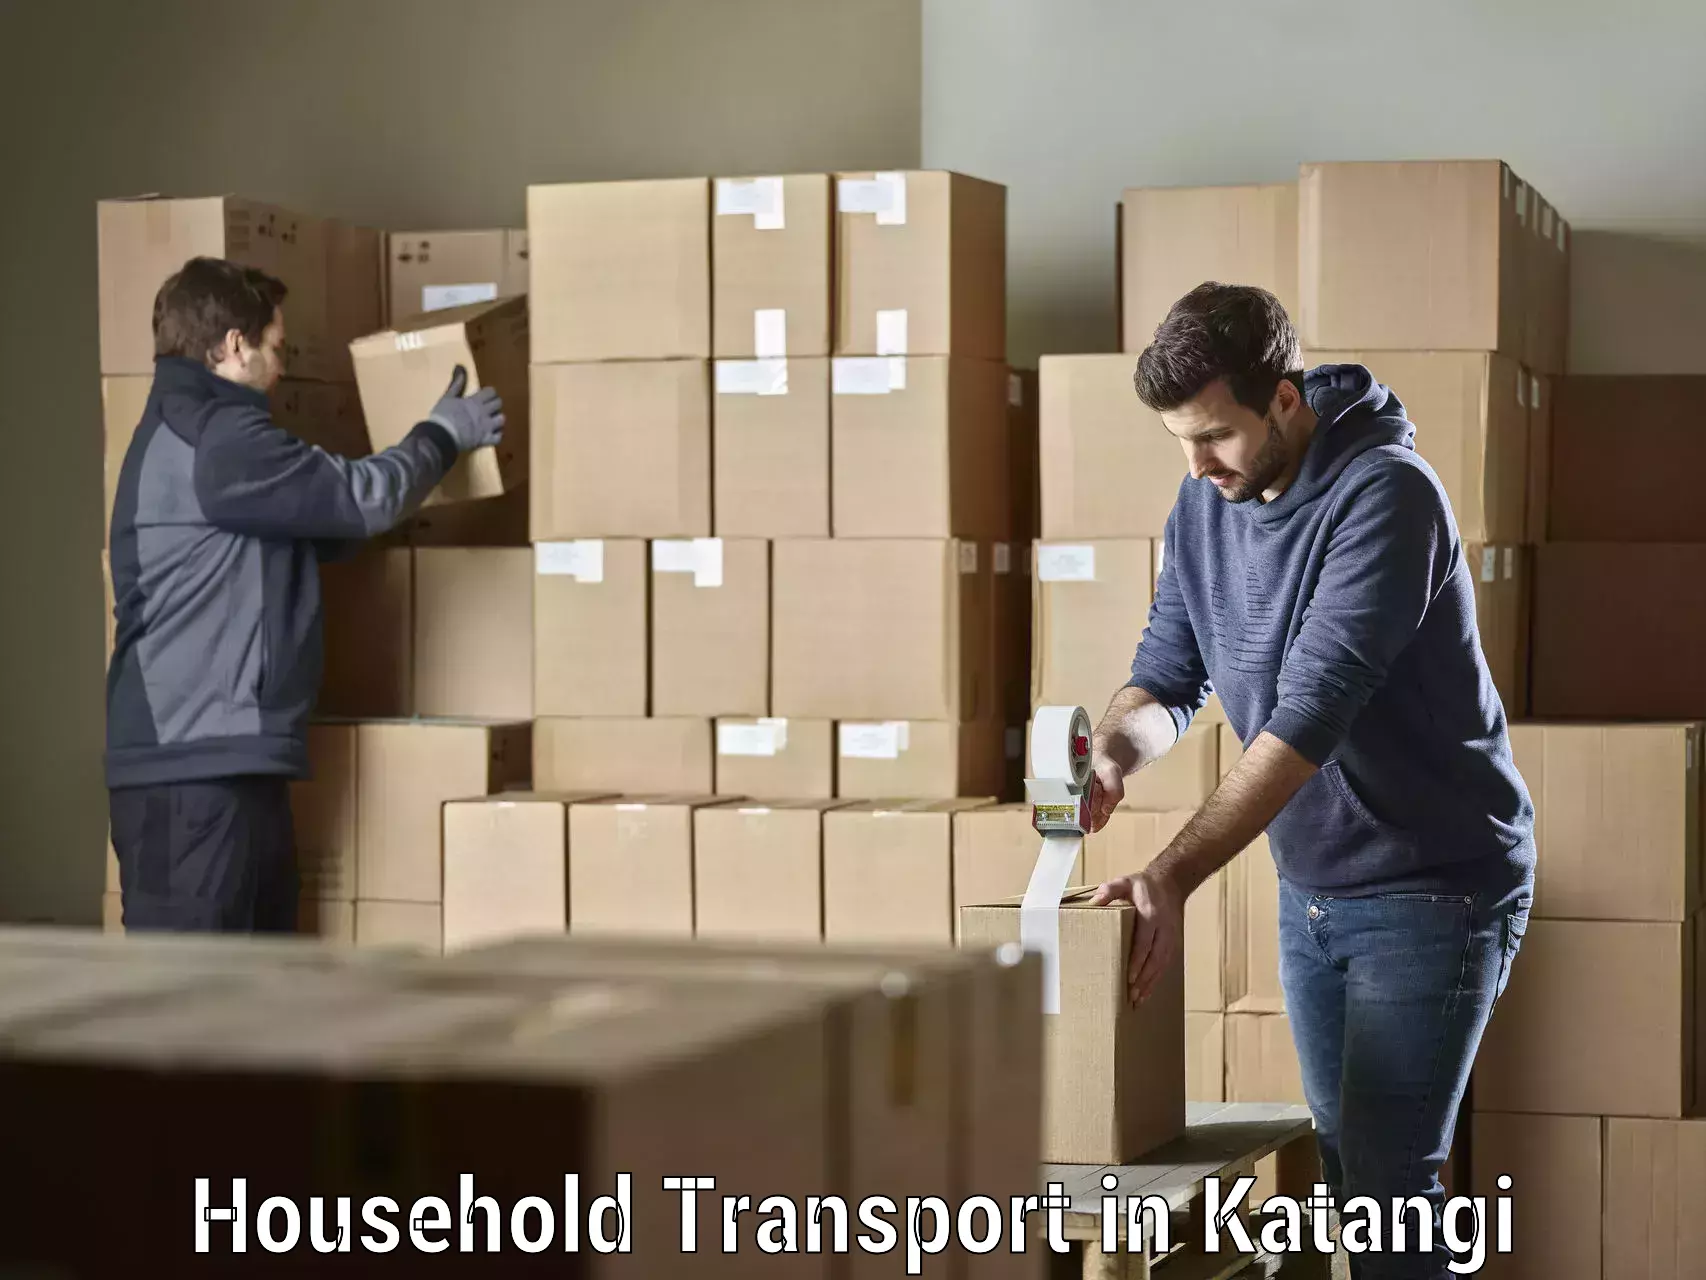 Specialized household transport in Katangi